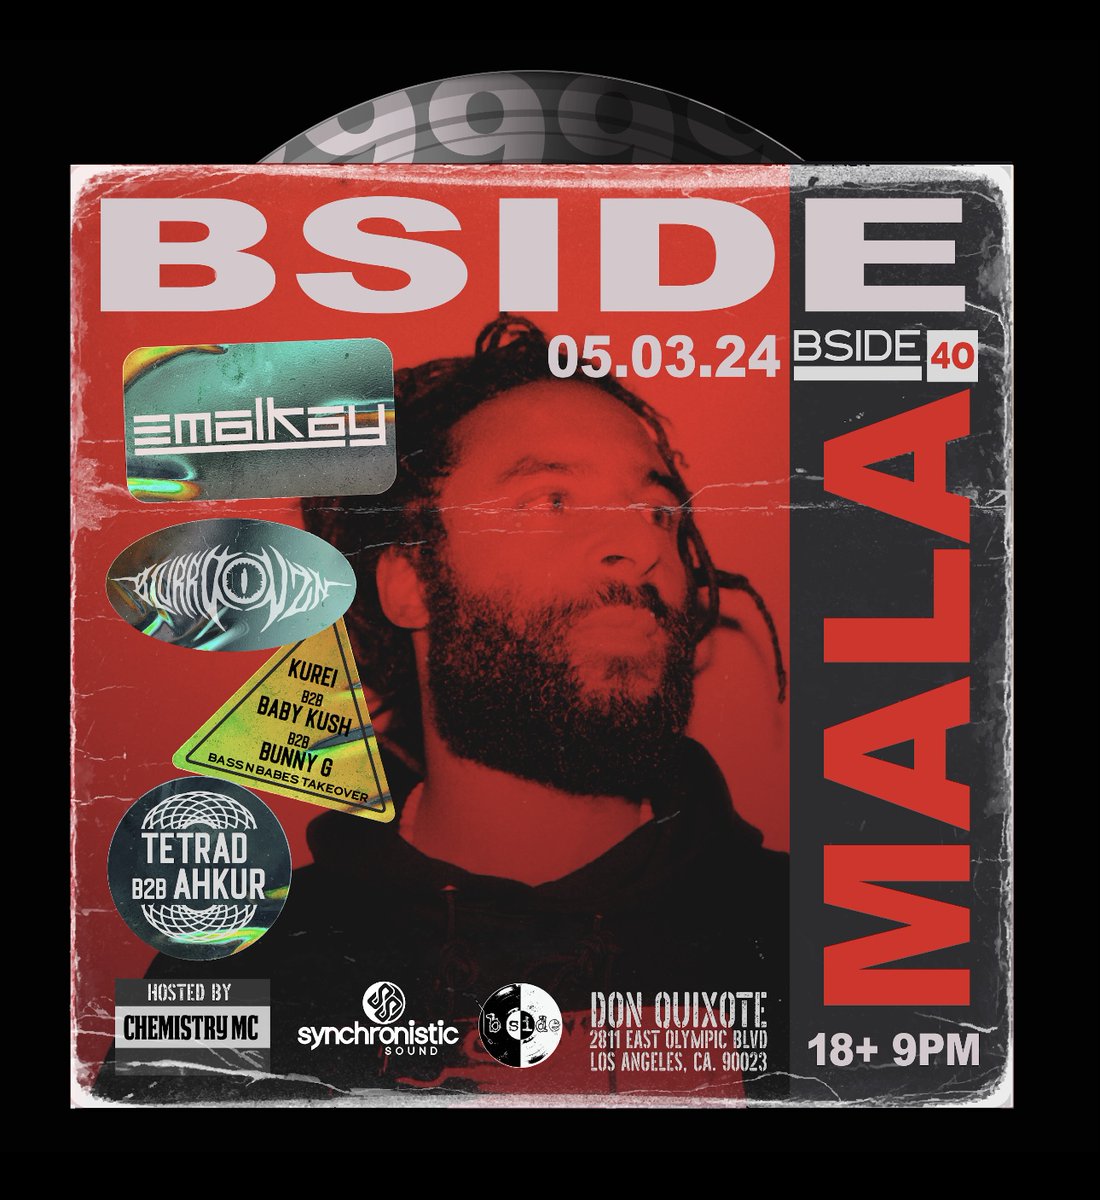 Next Friday 🔥 B-side is celebrating 9 years of Pushing Vibes Forward. With support by mala, emalkay, blurrd vzn, & more! 🎟️ Get tix: ow.ly/B7J950RnqMt Friday, May 3rd Doors: 9pm // 18+ #donquixotela #bsidela #malauk #maladmz